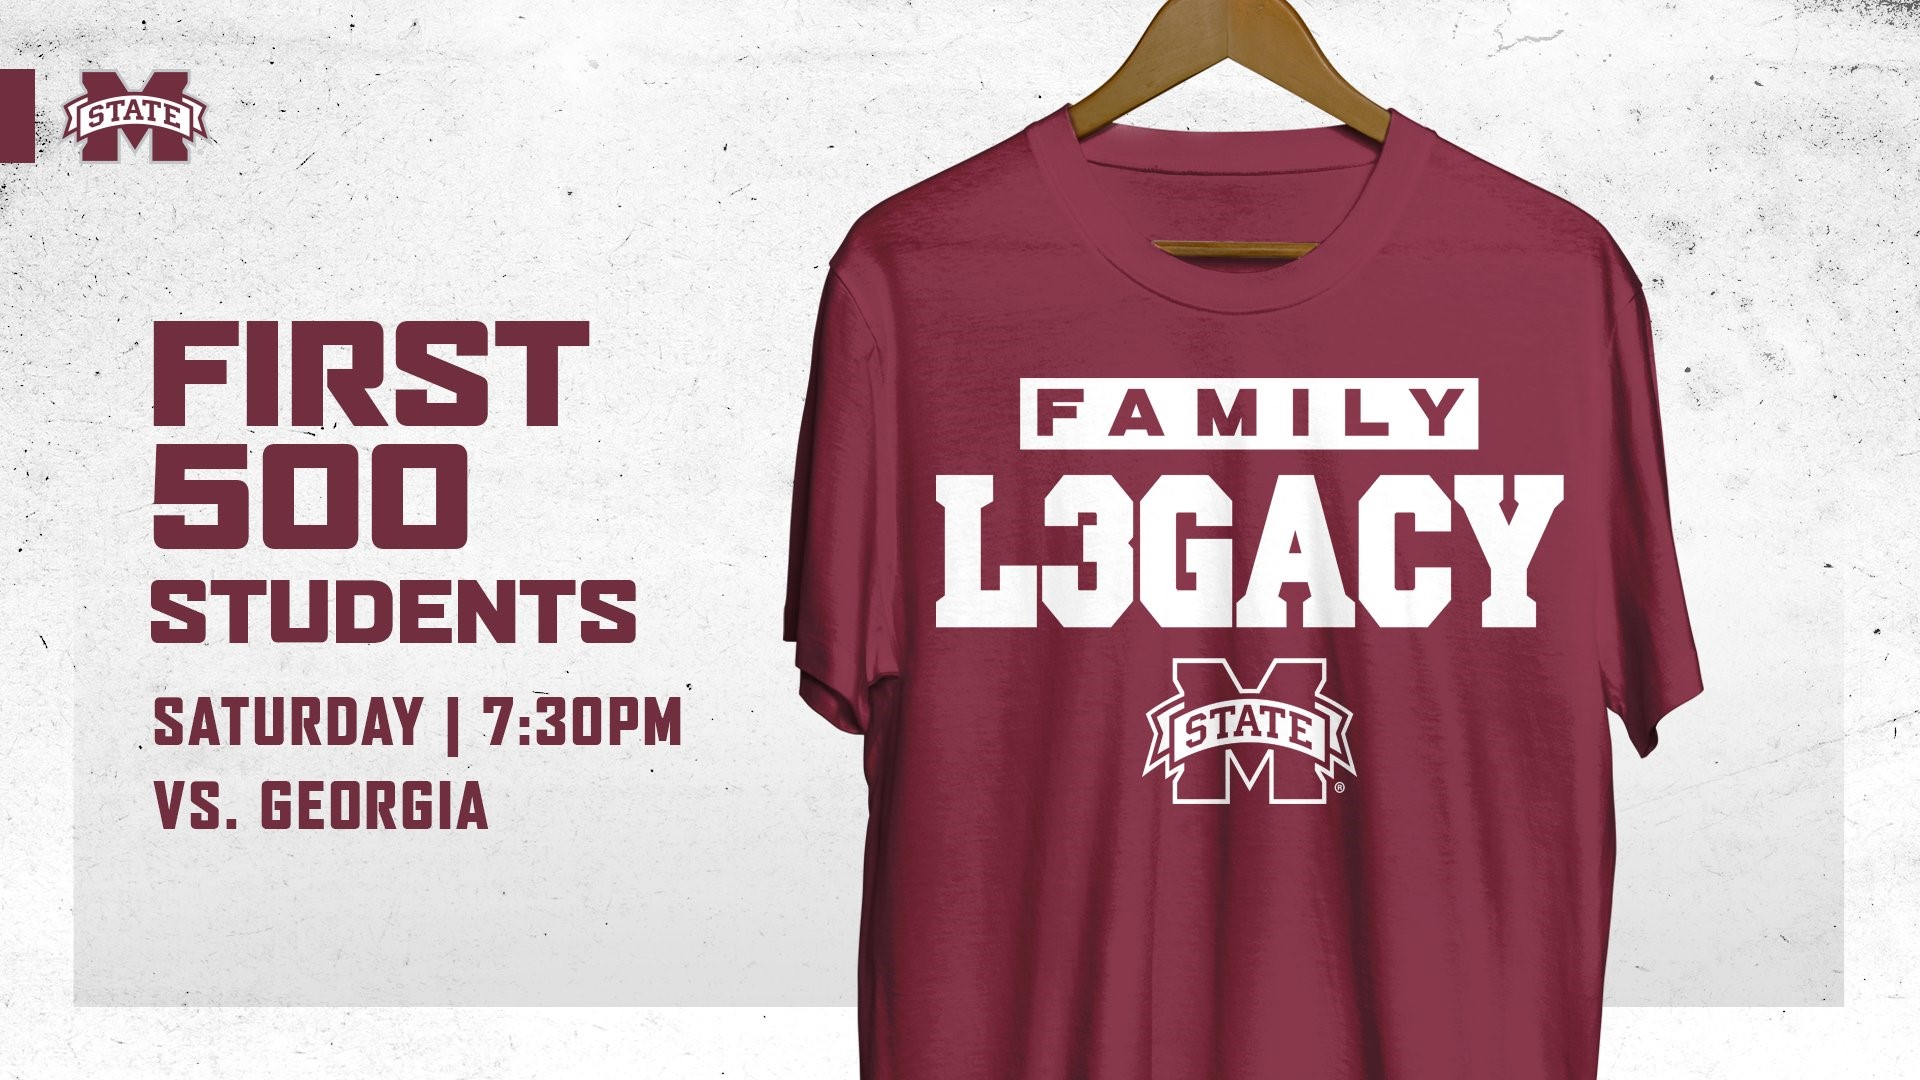 Promotional graphic for MSU men's basketball T-shirt giveaway